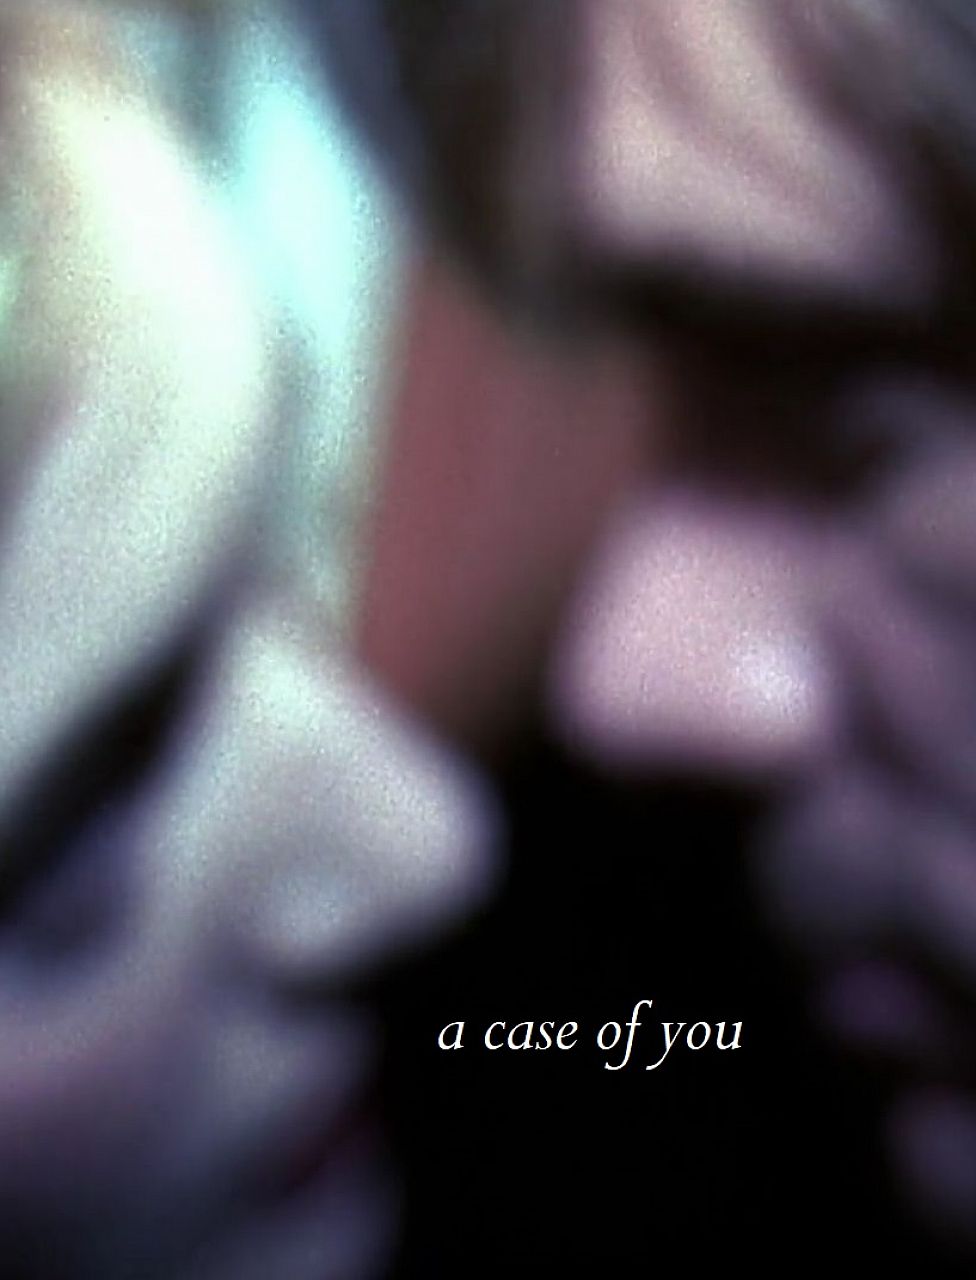 a case of you